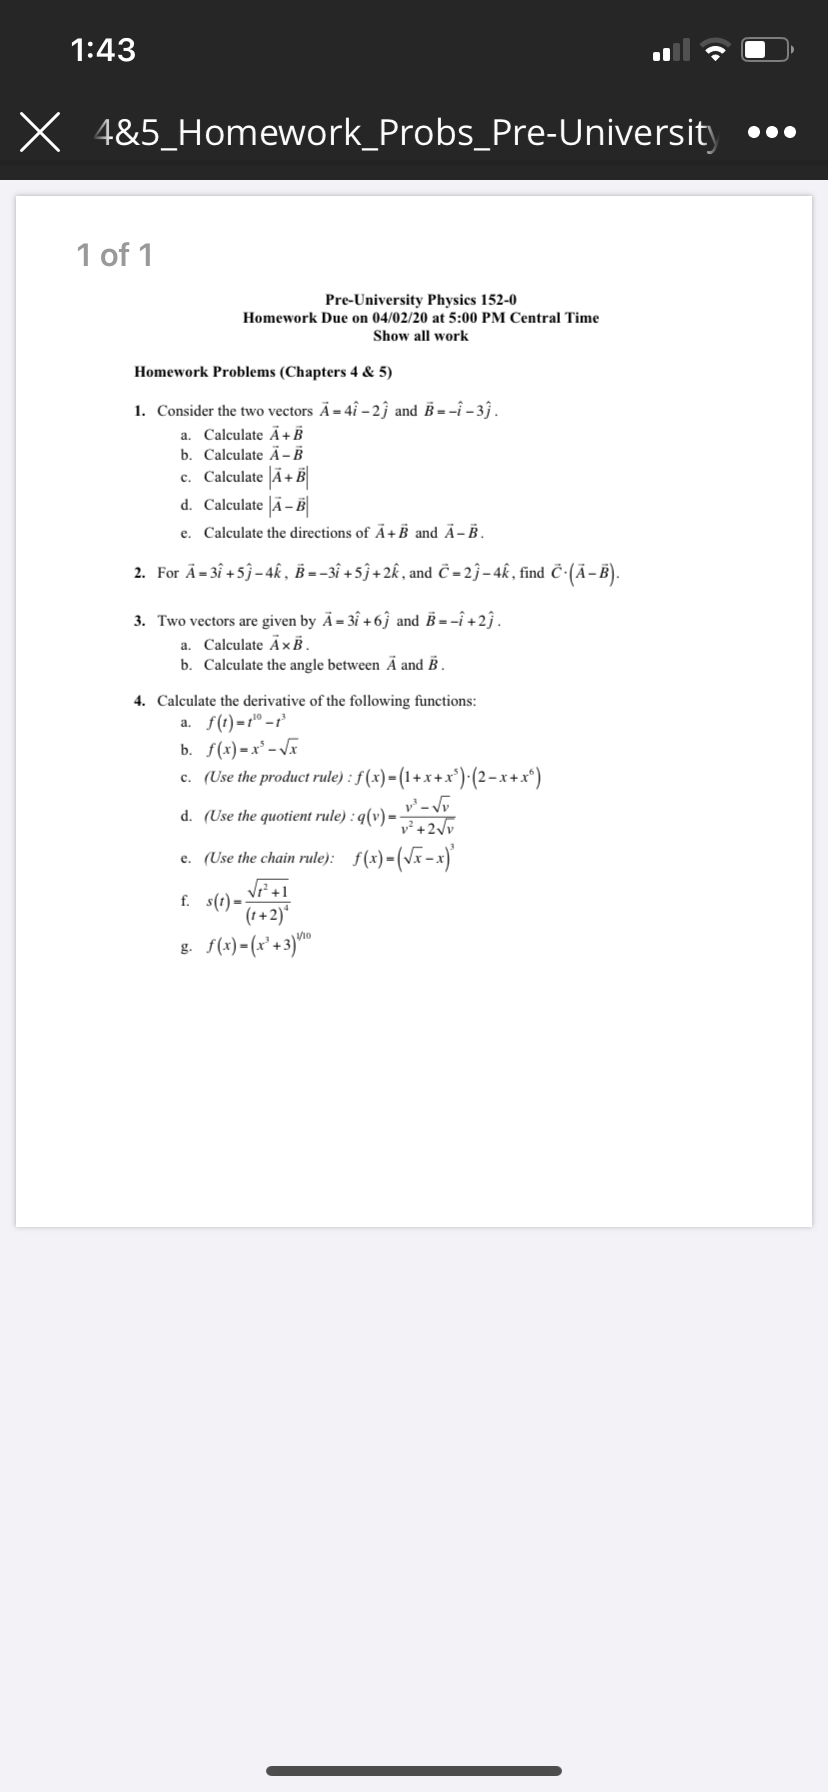 1:43
X 4&5_Homework_Probs_Pre-University
1 of 1
Pre-University Physics 152-0
Homework Due on 04/02/20 at 5:00 PM Central Time
Show all work
Homework Problems (Chapters 4 & 5)
1. Consider the two vectors Ä= 4î – 2ĵ and B = -î – 3 .
a. Calculate Ã+B
b. Calculate Ã - B
c. Calculate Ã+B
d. Calculate |Ã– B
e. Calculate the directions of Ã+B and Ä- B.
2. For Ä= 3î +5j-4k , B = -3î + 5ĵ + 2k , and Č - 2ĵ– 4k, find č-(Ā-B).
3. Two vectors are given by Ã= 3î + 6ĵ and B = -î +2ĵ.
Calculate ÃxB,
b. Calculate the angle between Ā and B .
a.
4. Calculate the derivative of the following functions:
а. f()-г" -г
b. f(x) =x² - Vx
c. (Use the product rule) : f (x)=(1+x+x')(2-x+x*)
d. (Use the quotient rule) : q(v) =
v²+2\v
e. (Use the chain rule): f(x)-(Vx-x)
Vi+1
f. s(t)=
(1+2)*
g. f(x) - (x° +3)"
